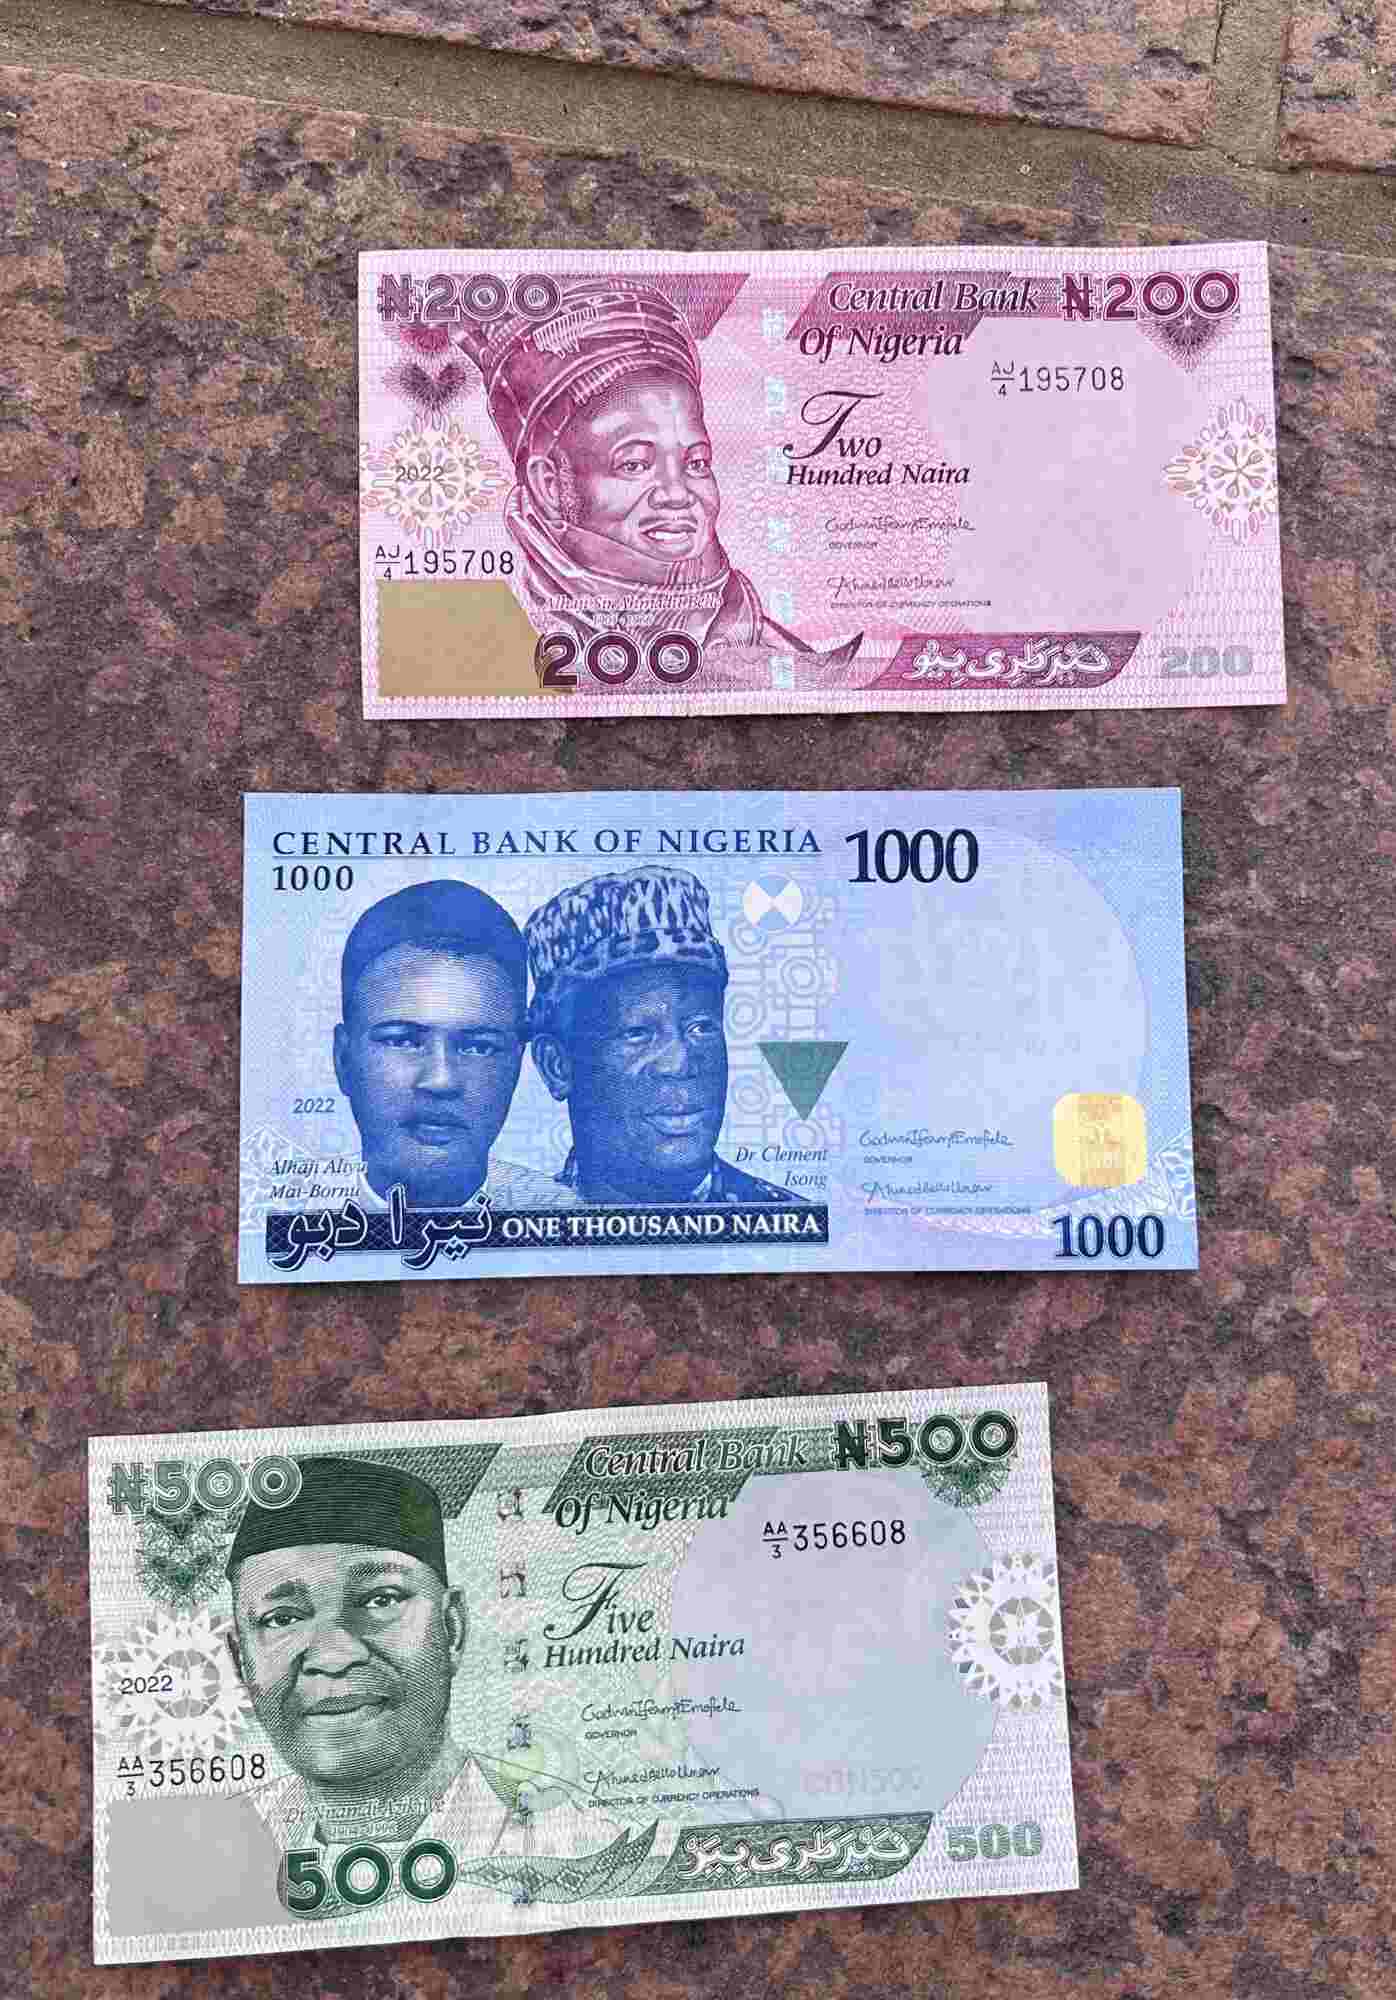 See photos of the new Naira notes President Buhari unveiled today